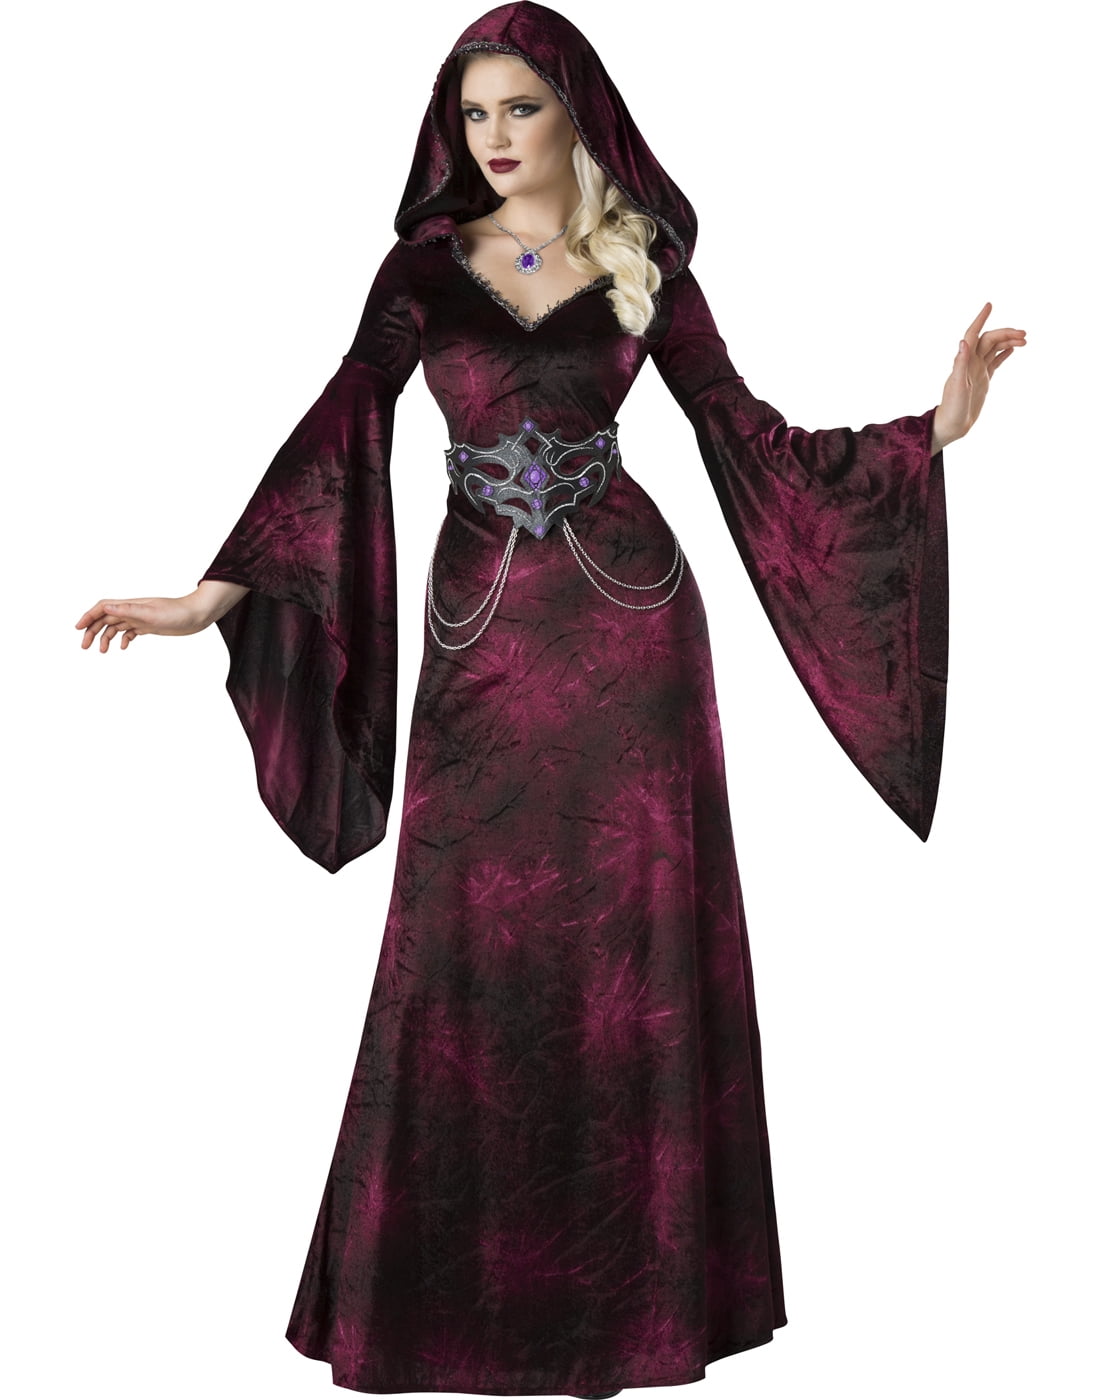 Gothic Vampire Ladies Fancy Dress Adults Dark Halloween Robe Costume Outfit 